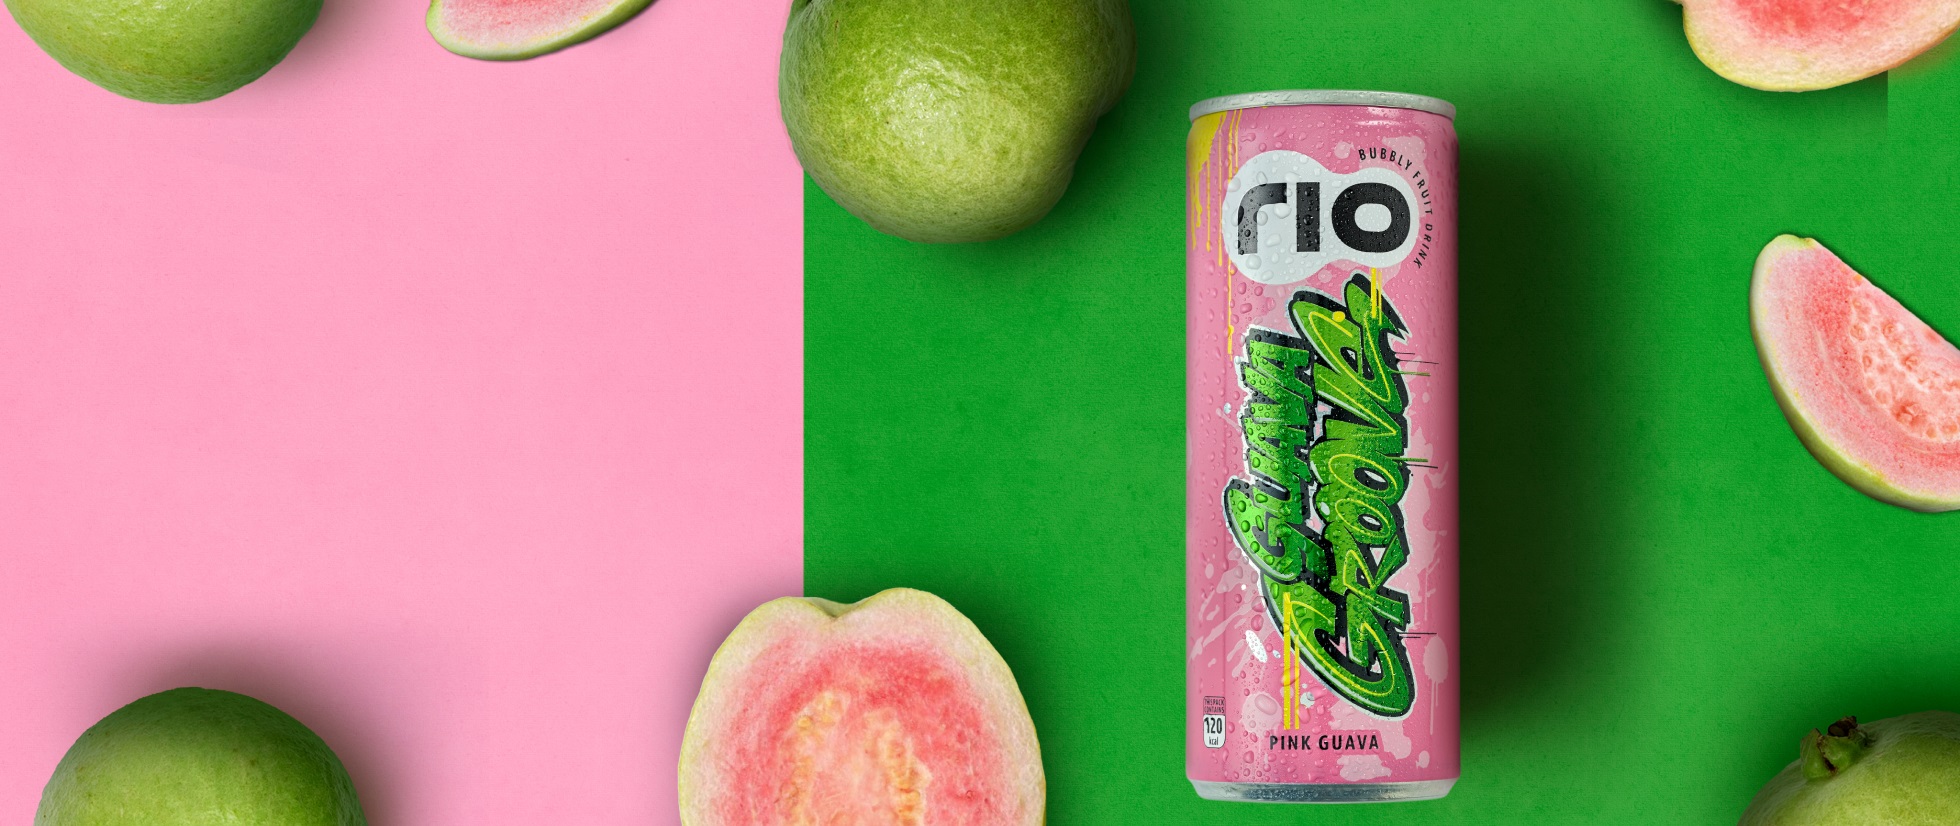 Rio Pink Guava Bubbly Fruit Drink